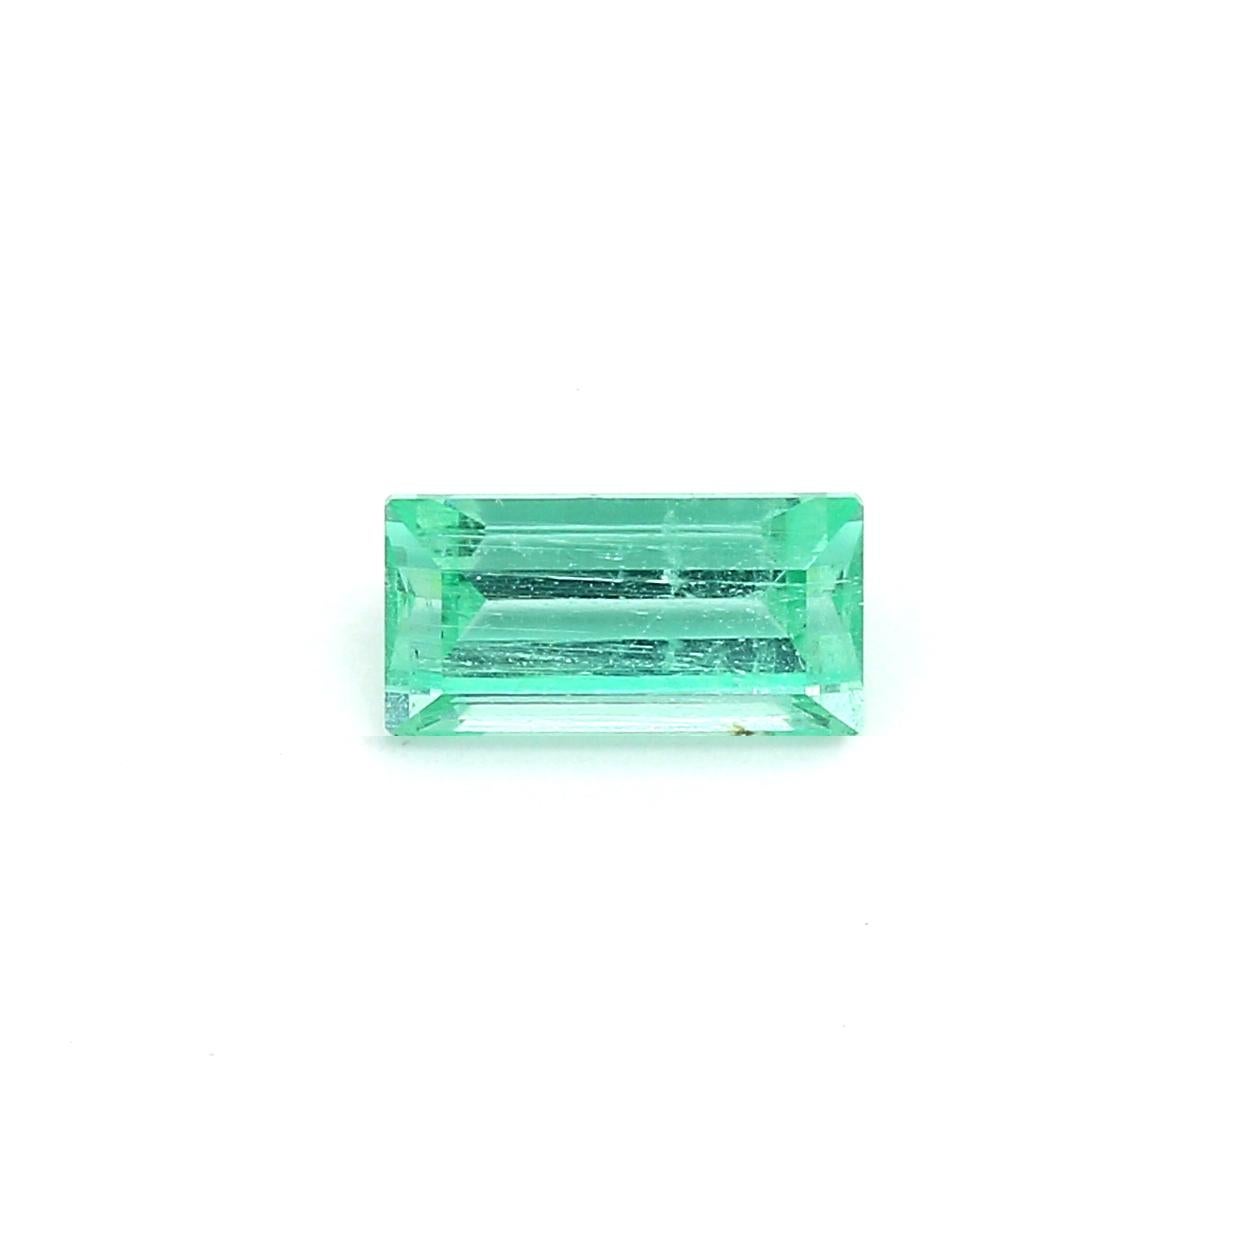 An amazing Russian Emerald which allows jewelers to create a unique piece of wearable art.
This exceptional quality gemstone would make a custom-made jewelry design. Perfect for a Ring or Pendant.

Shape - Baguette
Weight - 1.19 ct
Treatment -